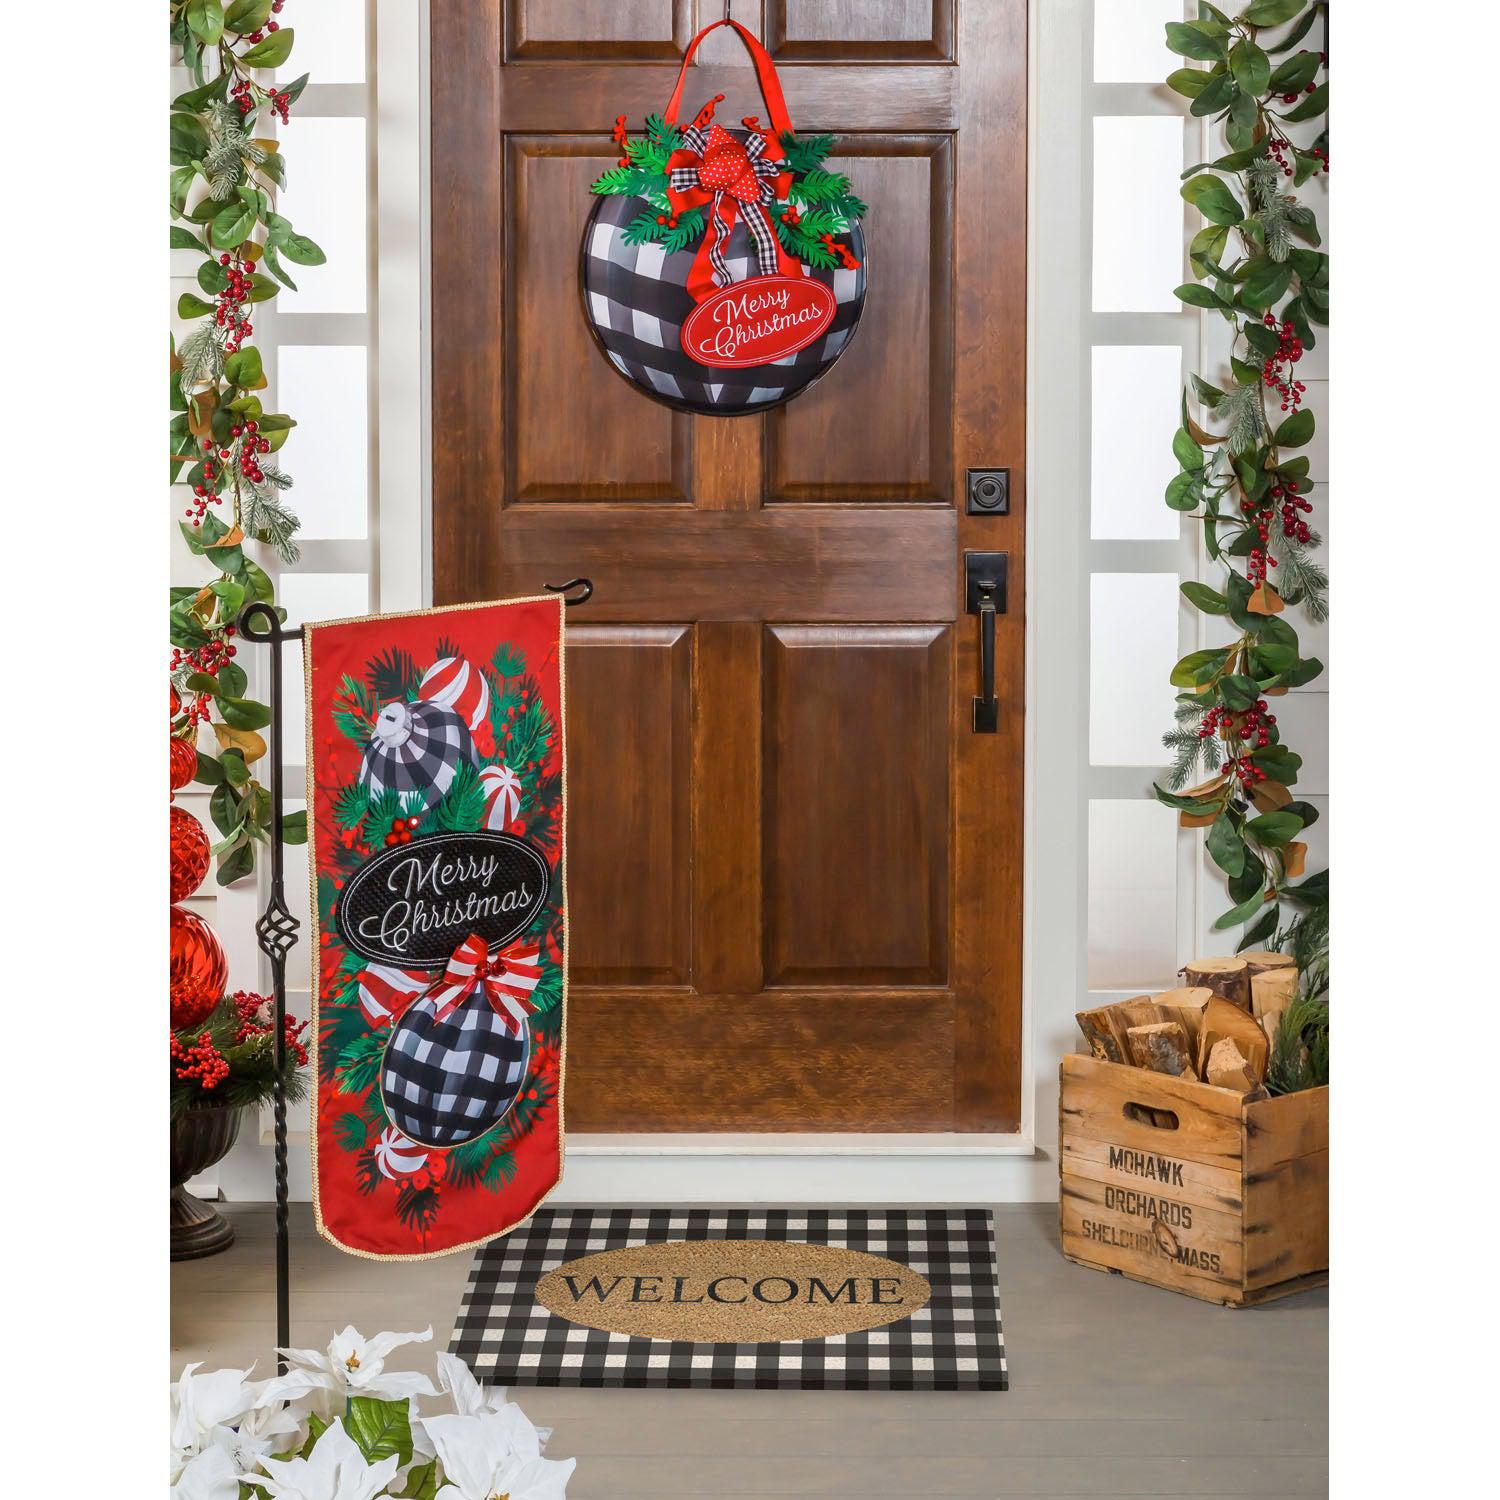 This extra-long garden flag features checked ornaments with candy and bows hanging on pine boughs and the words "Merry Christmas". 